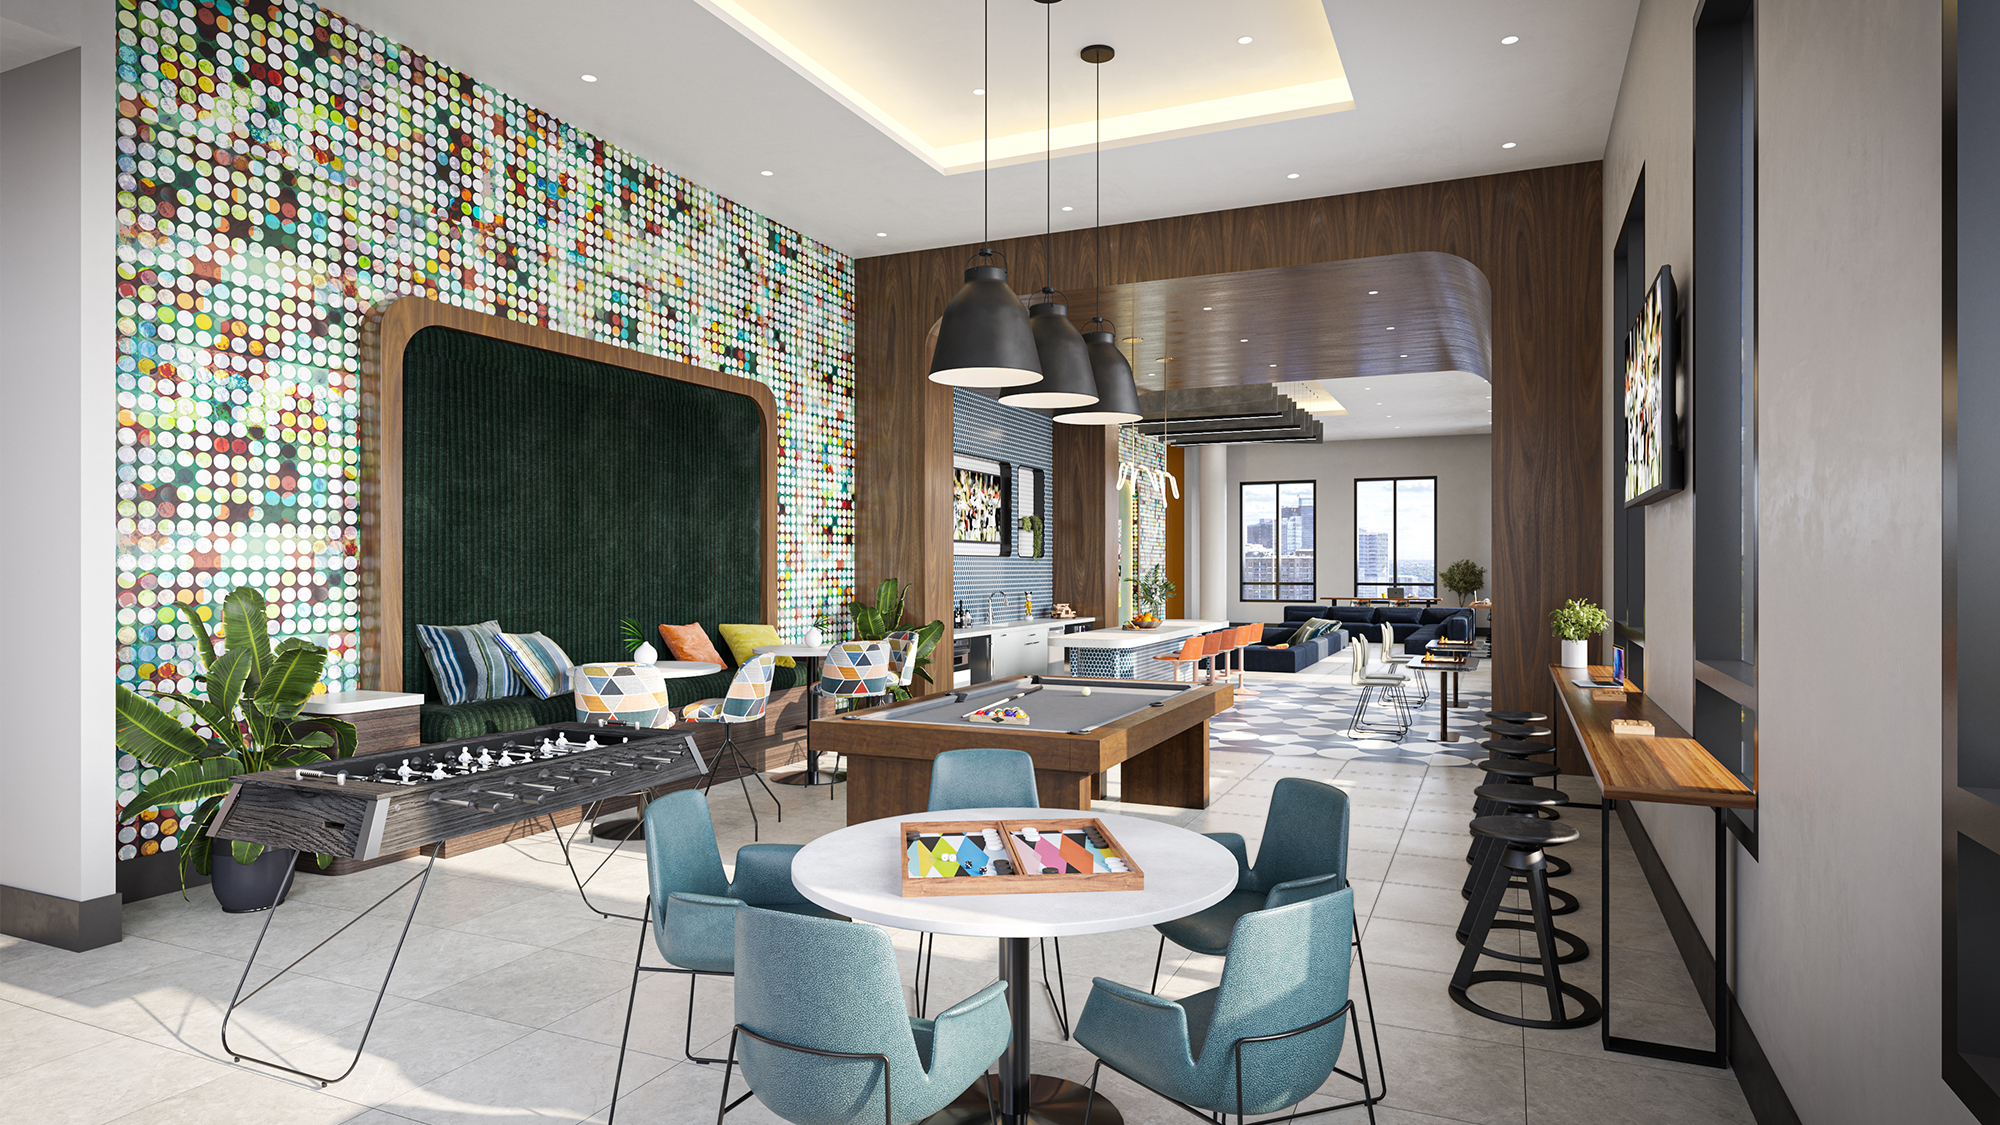 Resident lounge with pool and foosball tables, seating areas, and accent wall with a colorful circular pattern.